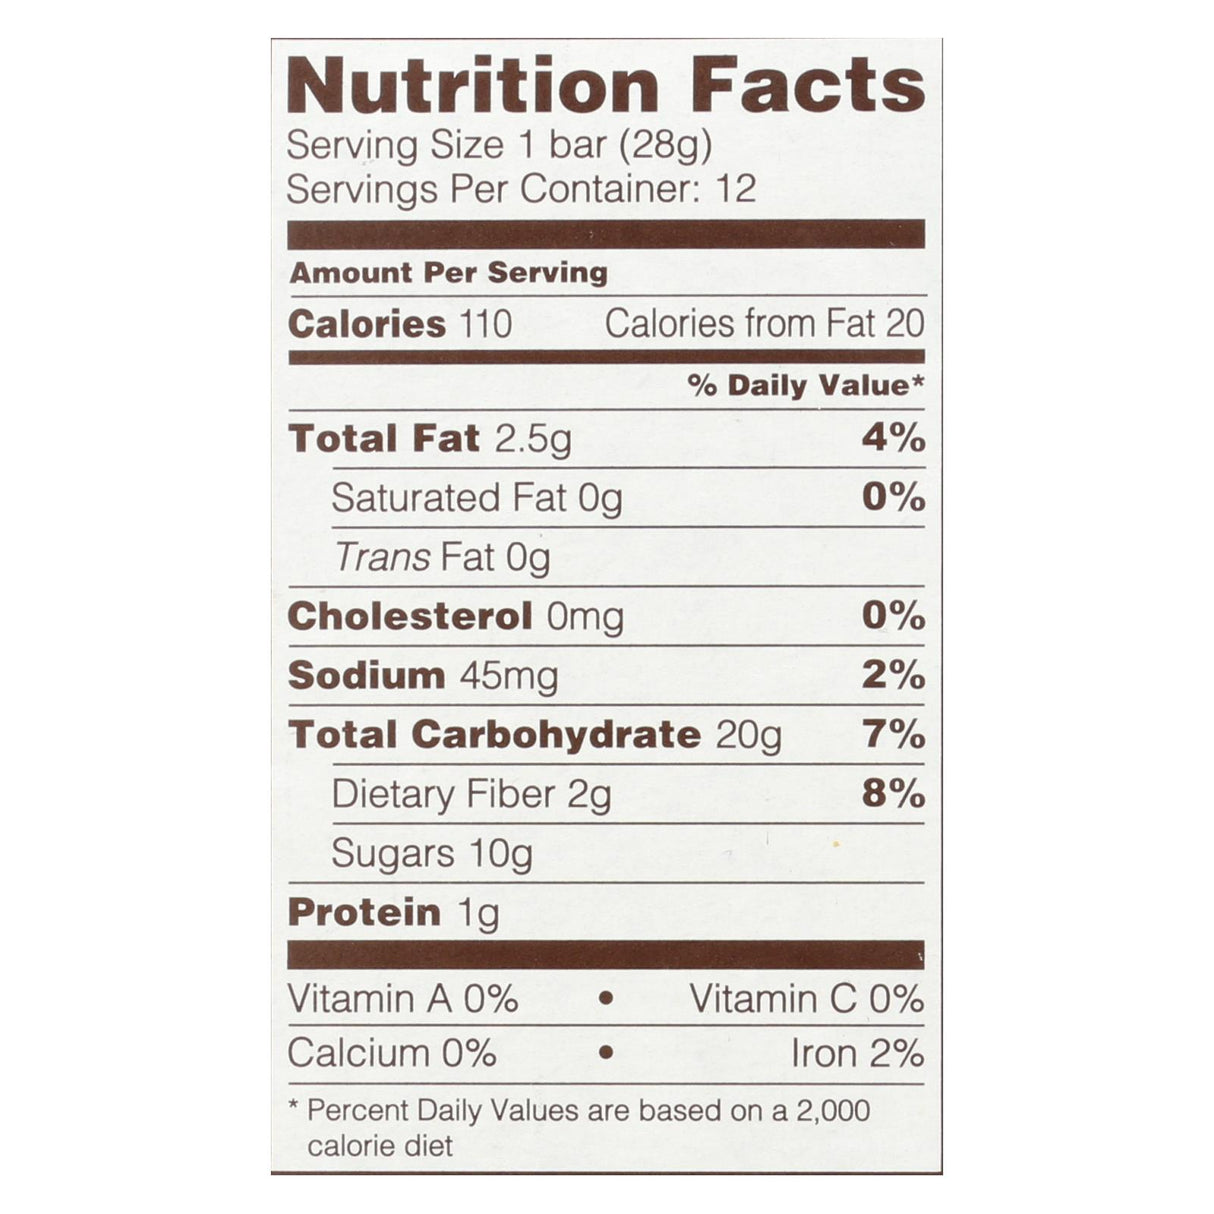 Nature's Bakery Stone Ground Whole Wheat Fig Bar - Peach Apricot - 2 Oz - Case Of 6